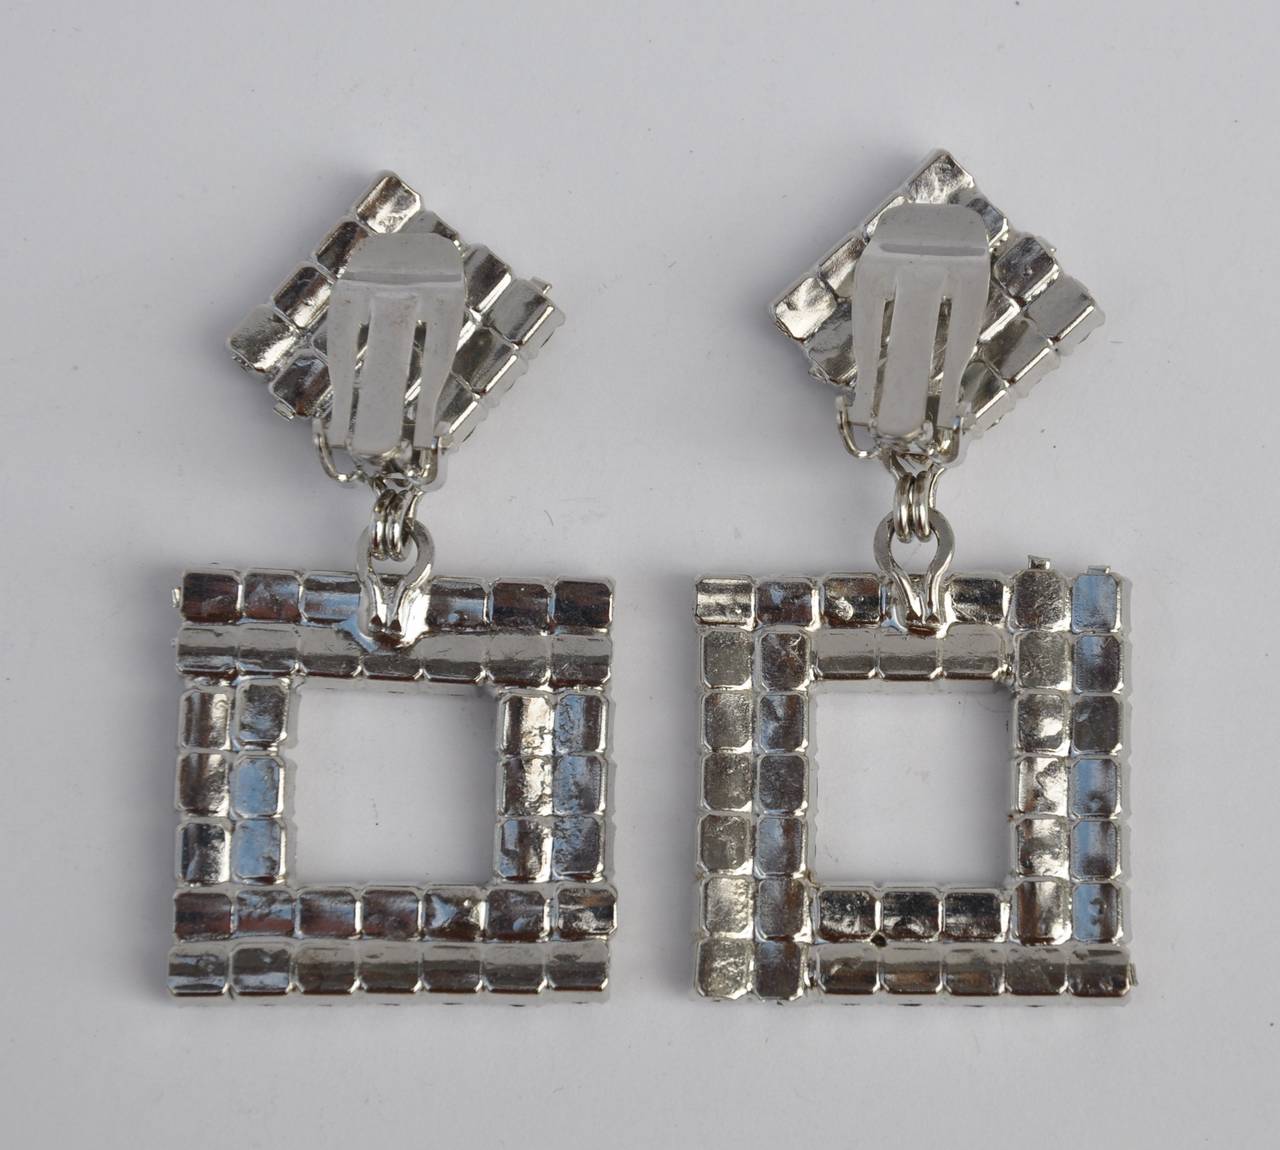 '80s' large multi-rhinestones with polished silver hardware drop ear clips measures 2 6/8" in length, width is 1 2/8", depth is 1/8".